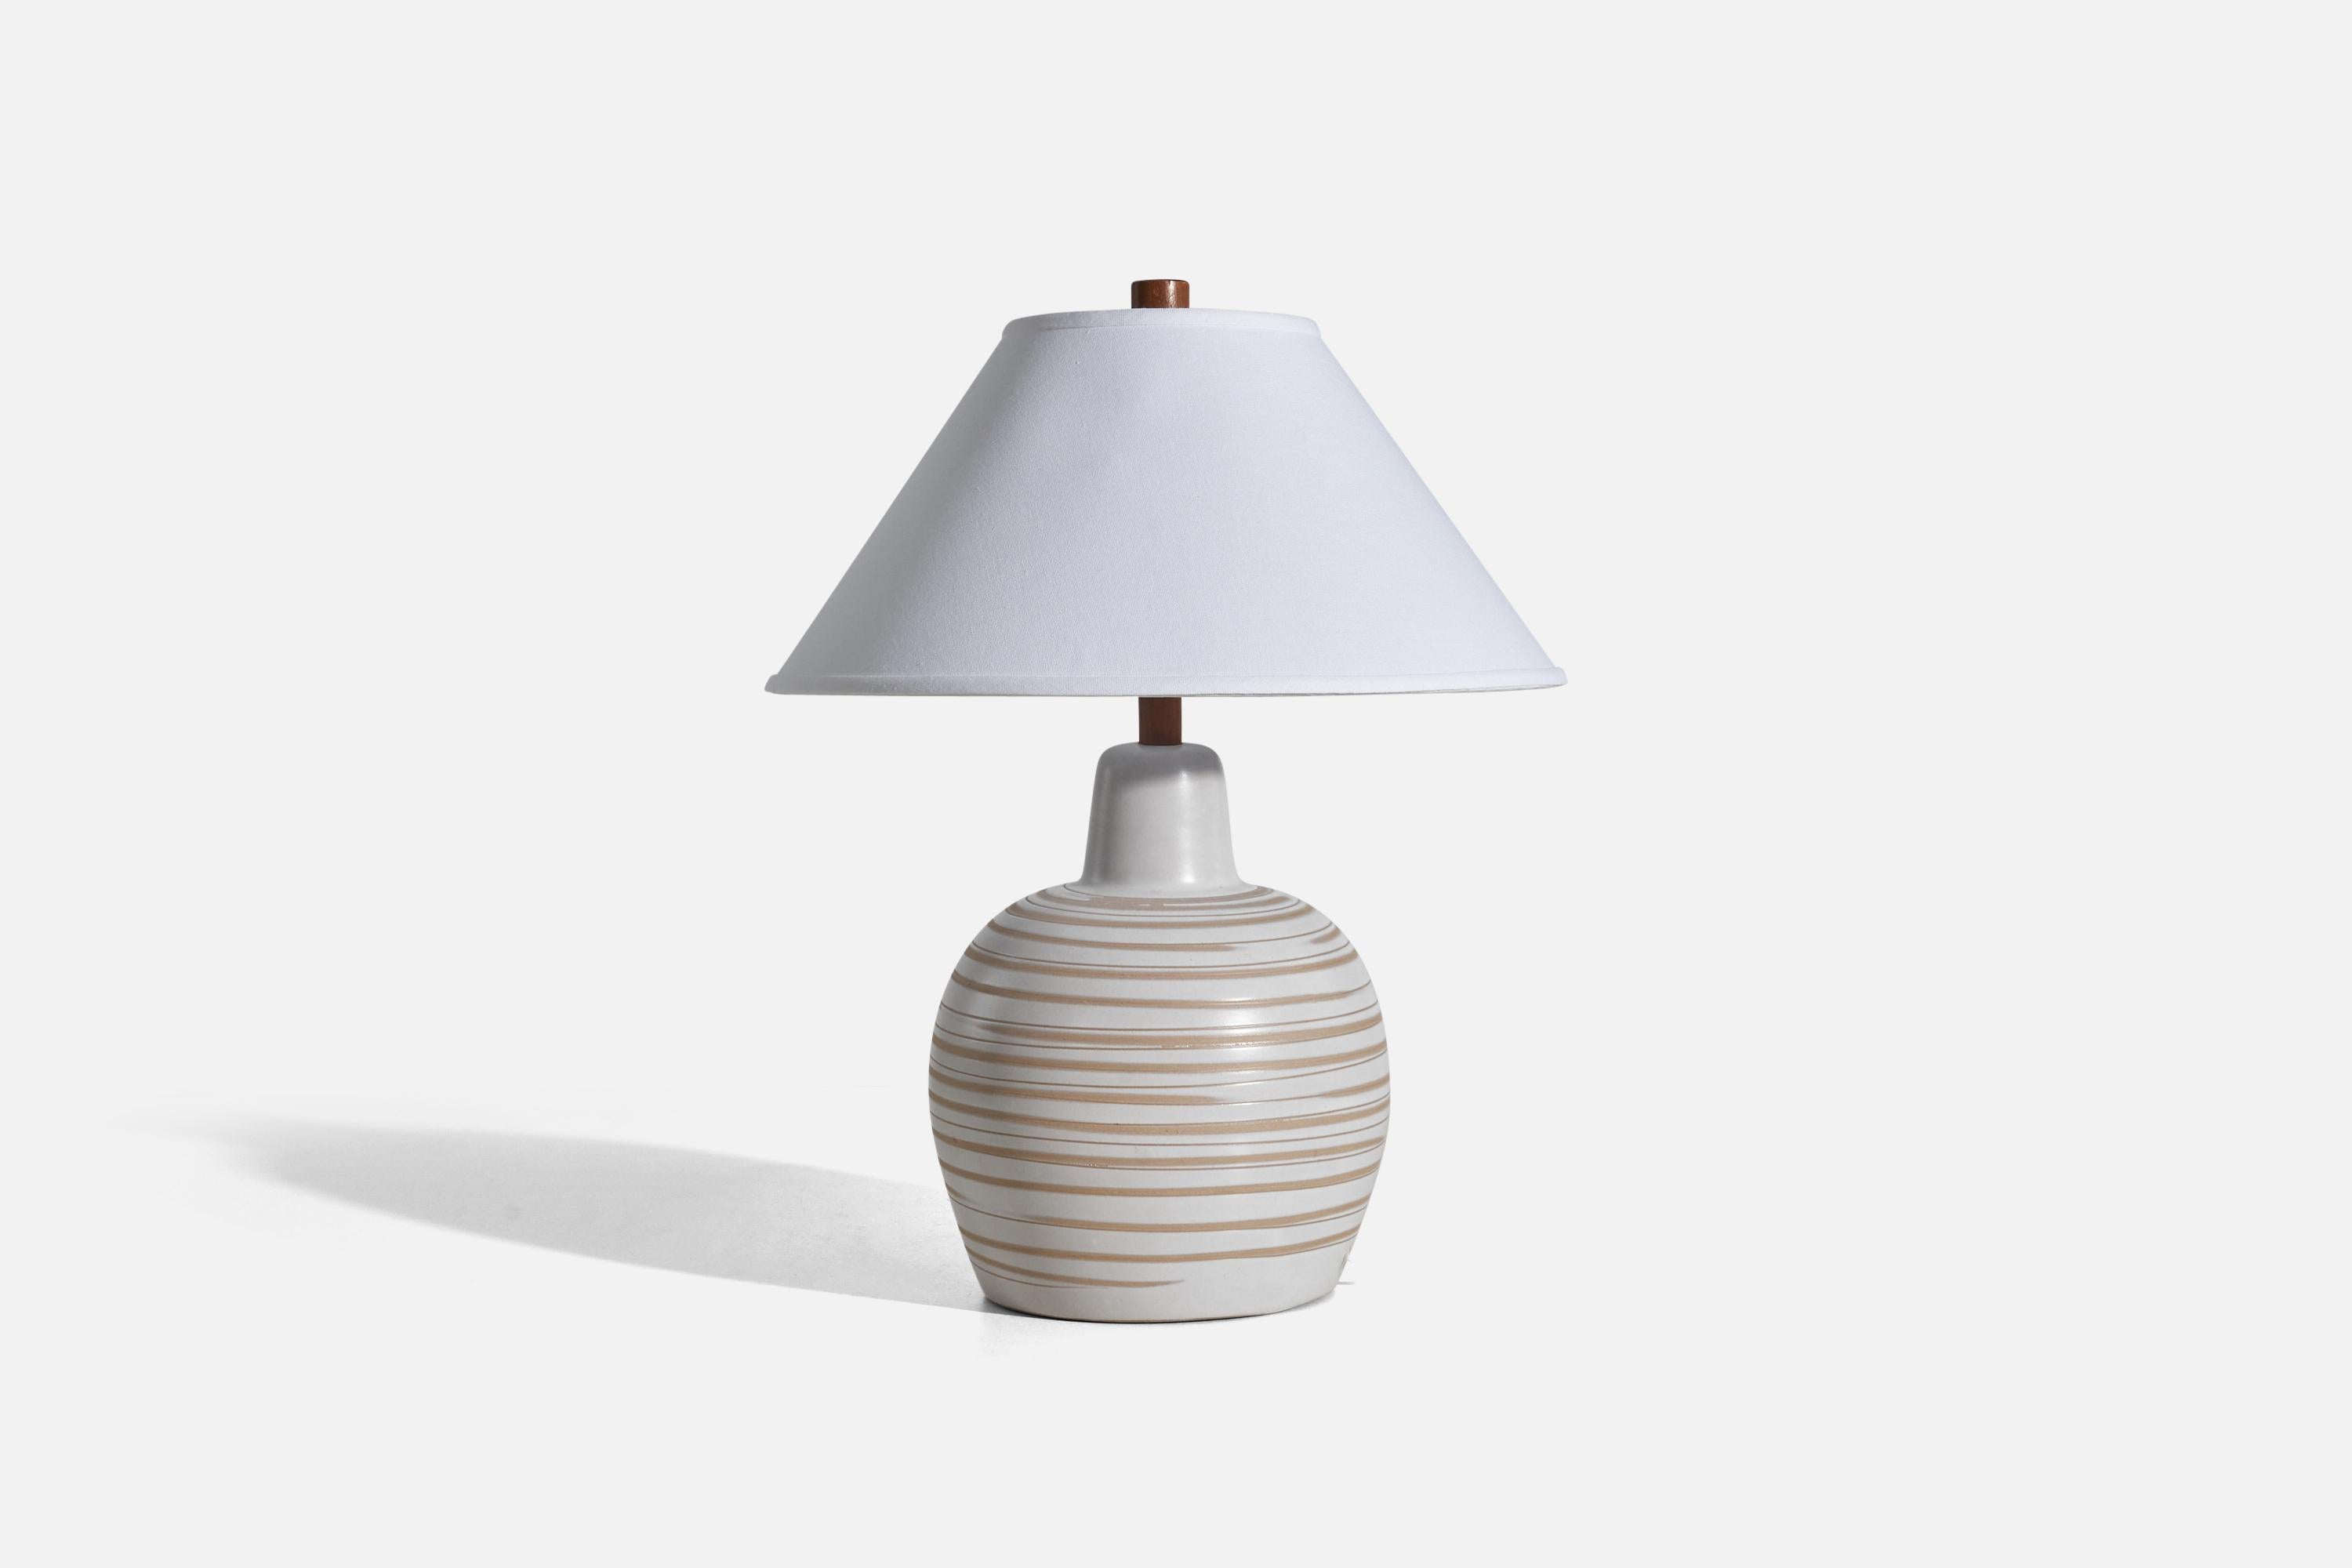 A white and beige ceramic and walnut table lamp designed by Jane & Gordon Martz and produced by Marshall Studios, Indianapolis, 1950s.

Sold without Lampshade
Dimensions of Lamp (inches) : 15.62 x 9.56 x 9.56 (Height x Width x Depth)
Dimensions of